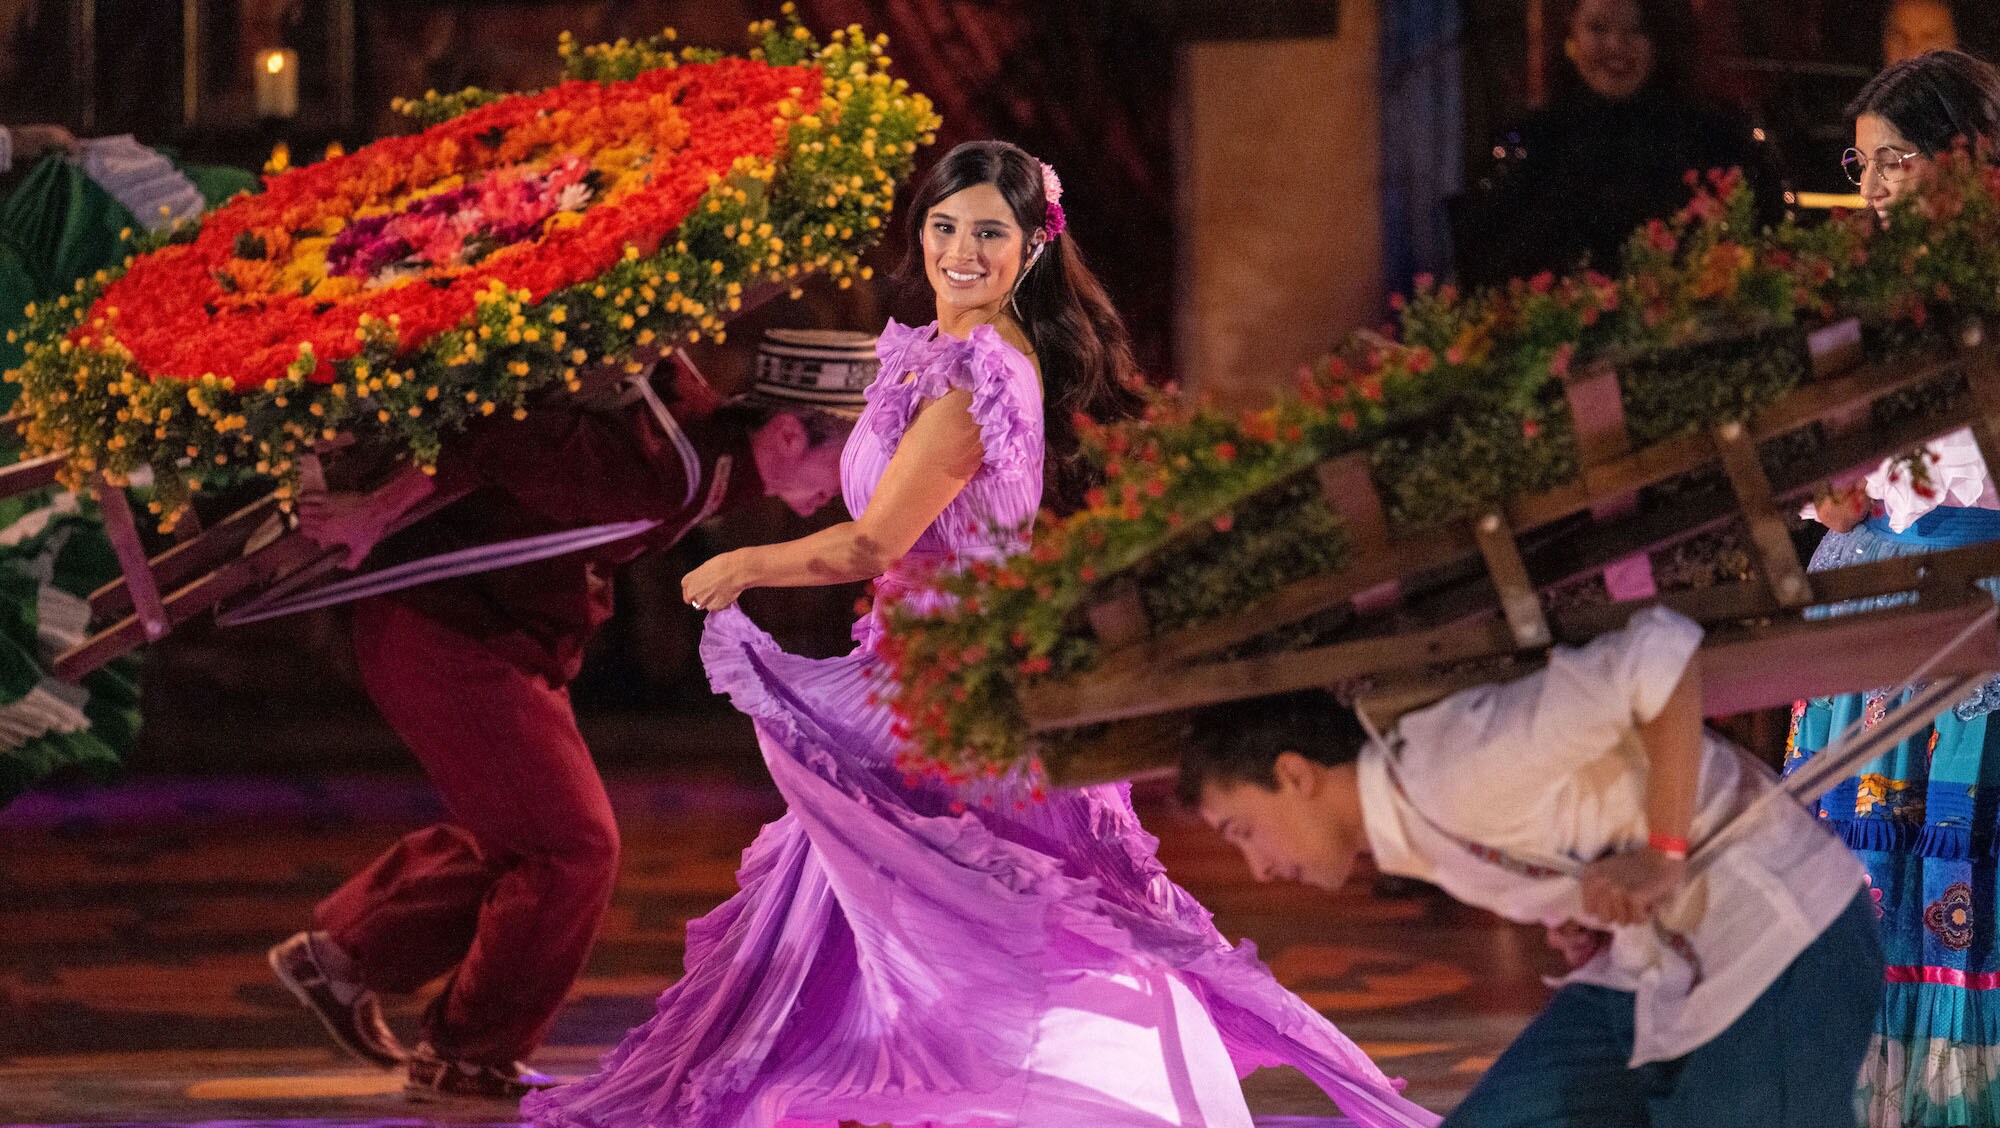 Diane Guerrero as Isabela during the live-to-film concert experience Encanto at the Hollywood Bowl. Encanto at the Hollywood Bowl, from Disney Branded Television, will premiere on Dec. 28 only on Disney+. (Photo credit: Disney/Temma Hankin)